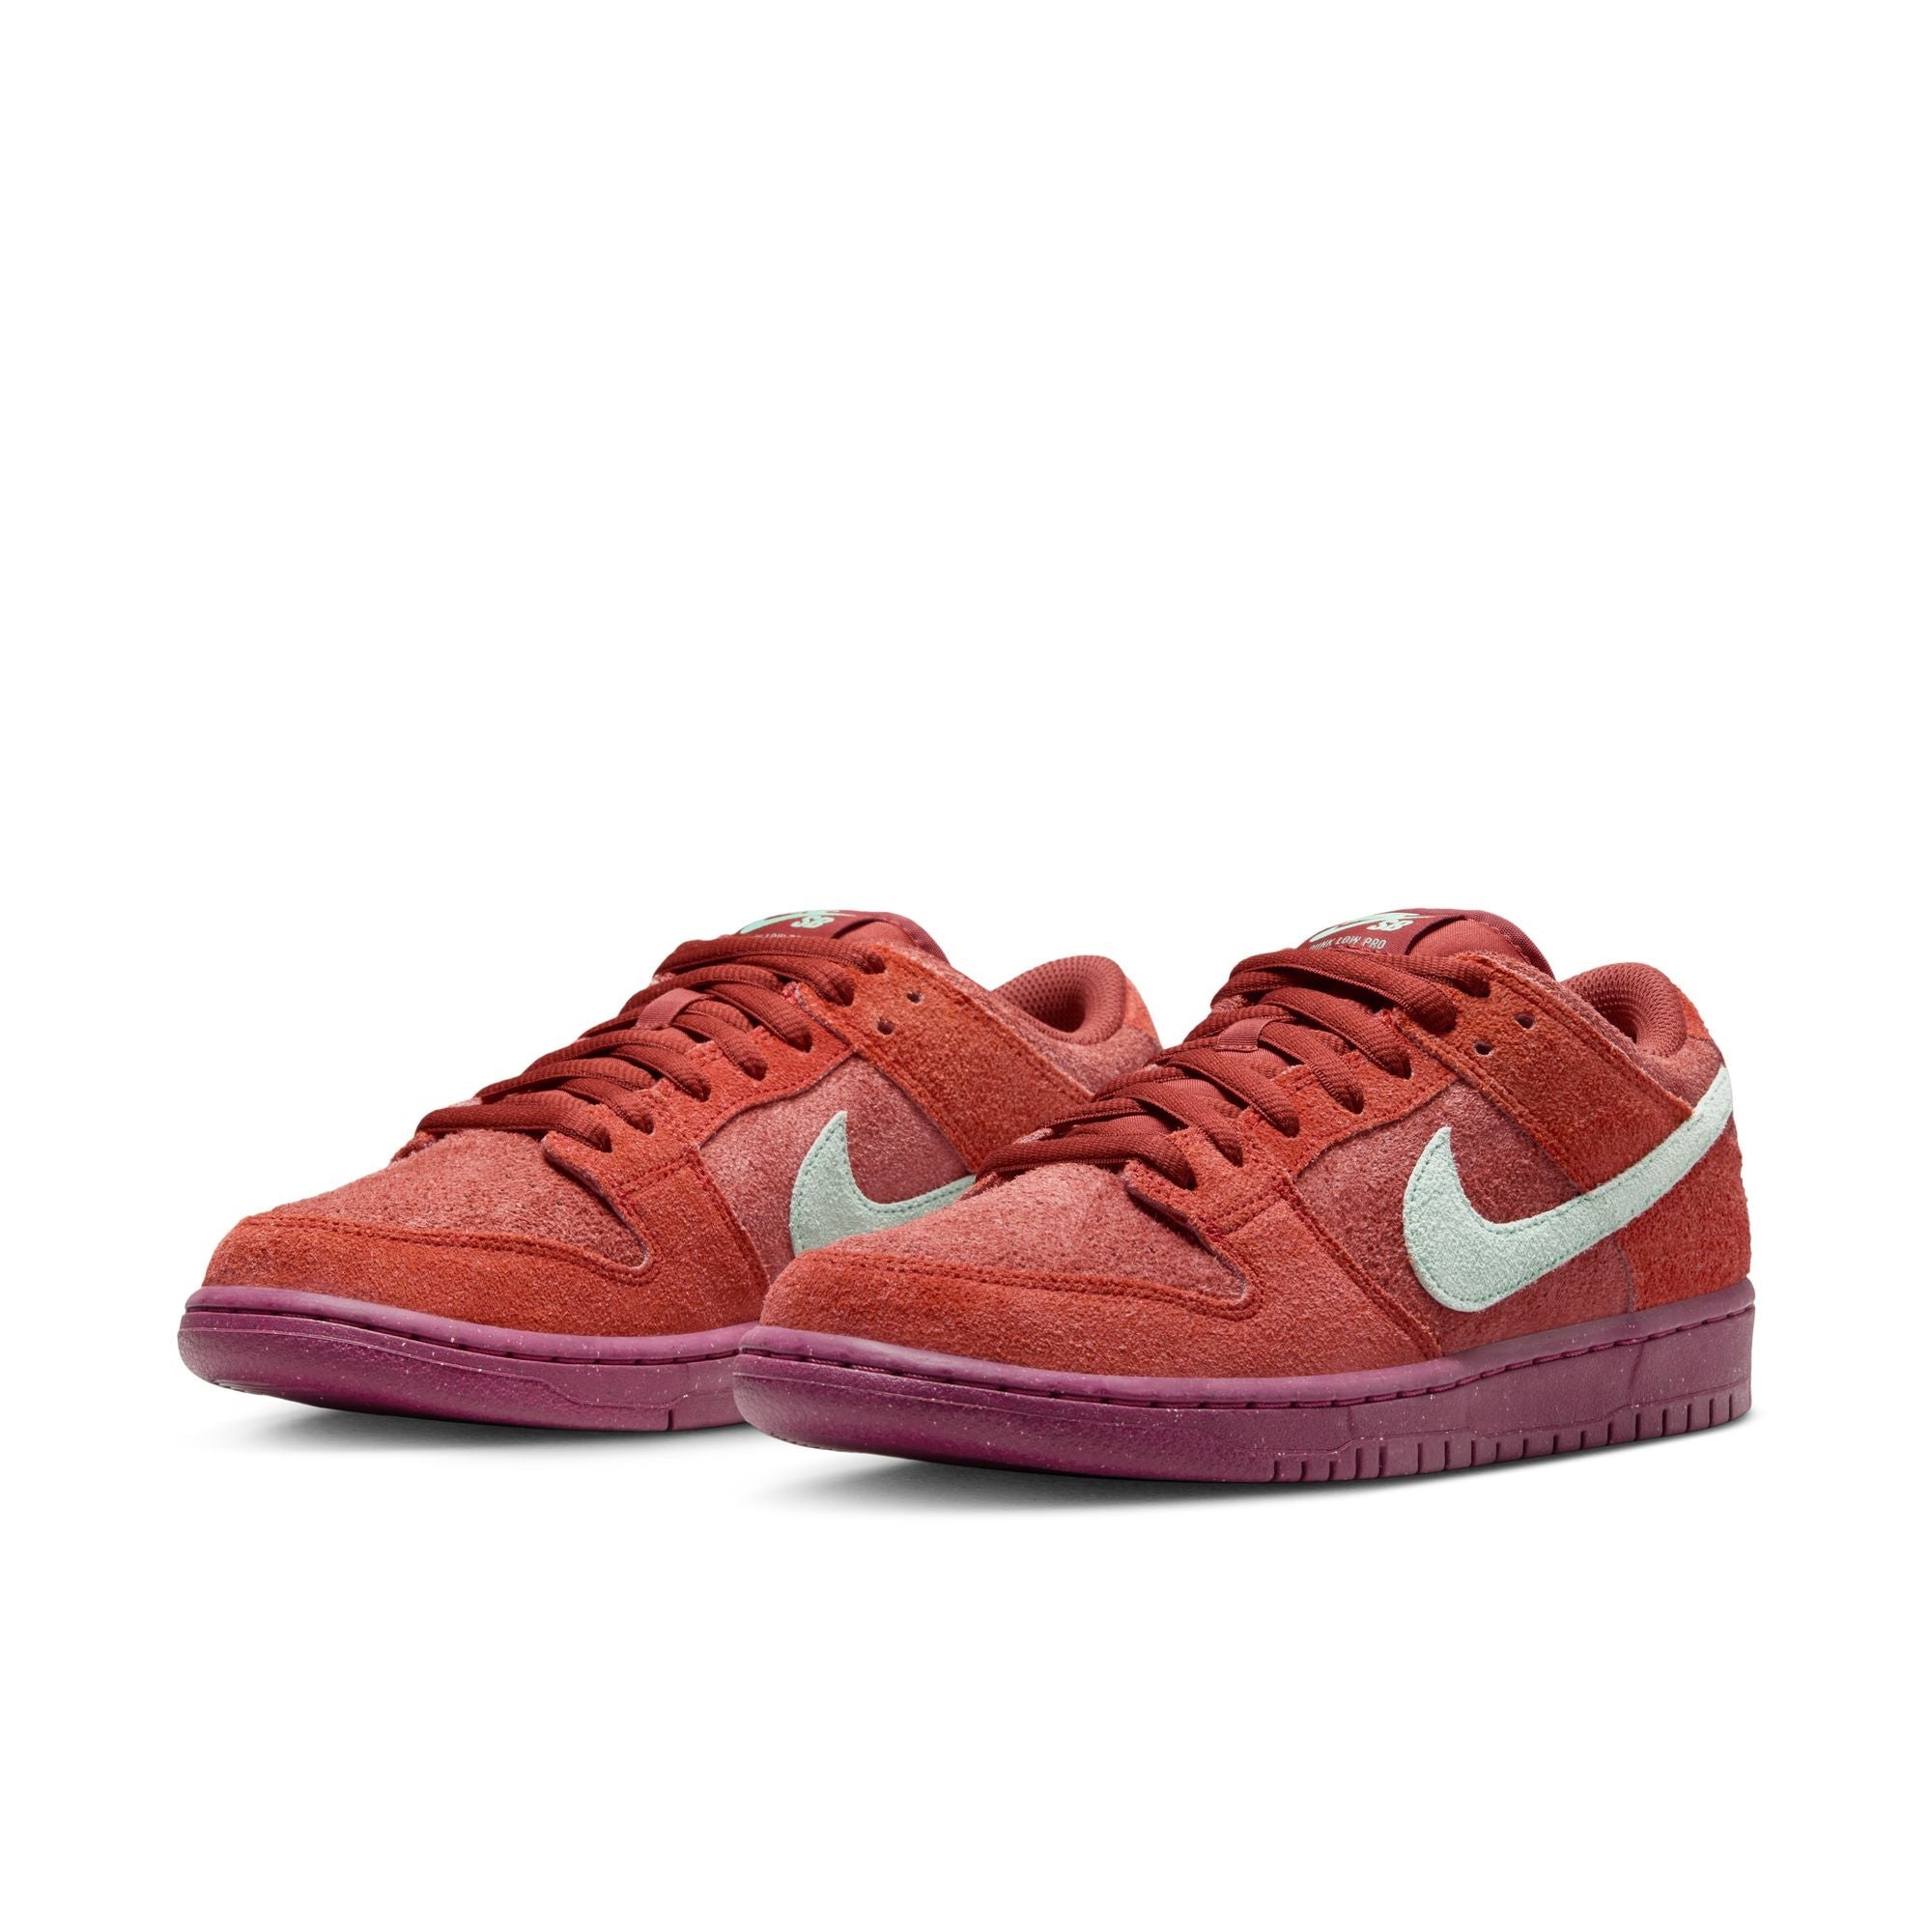 DUNK LOW PRO "MYSTIC RED"